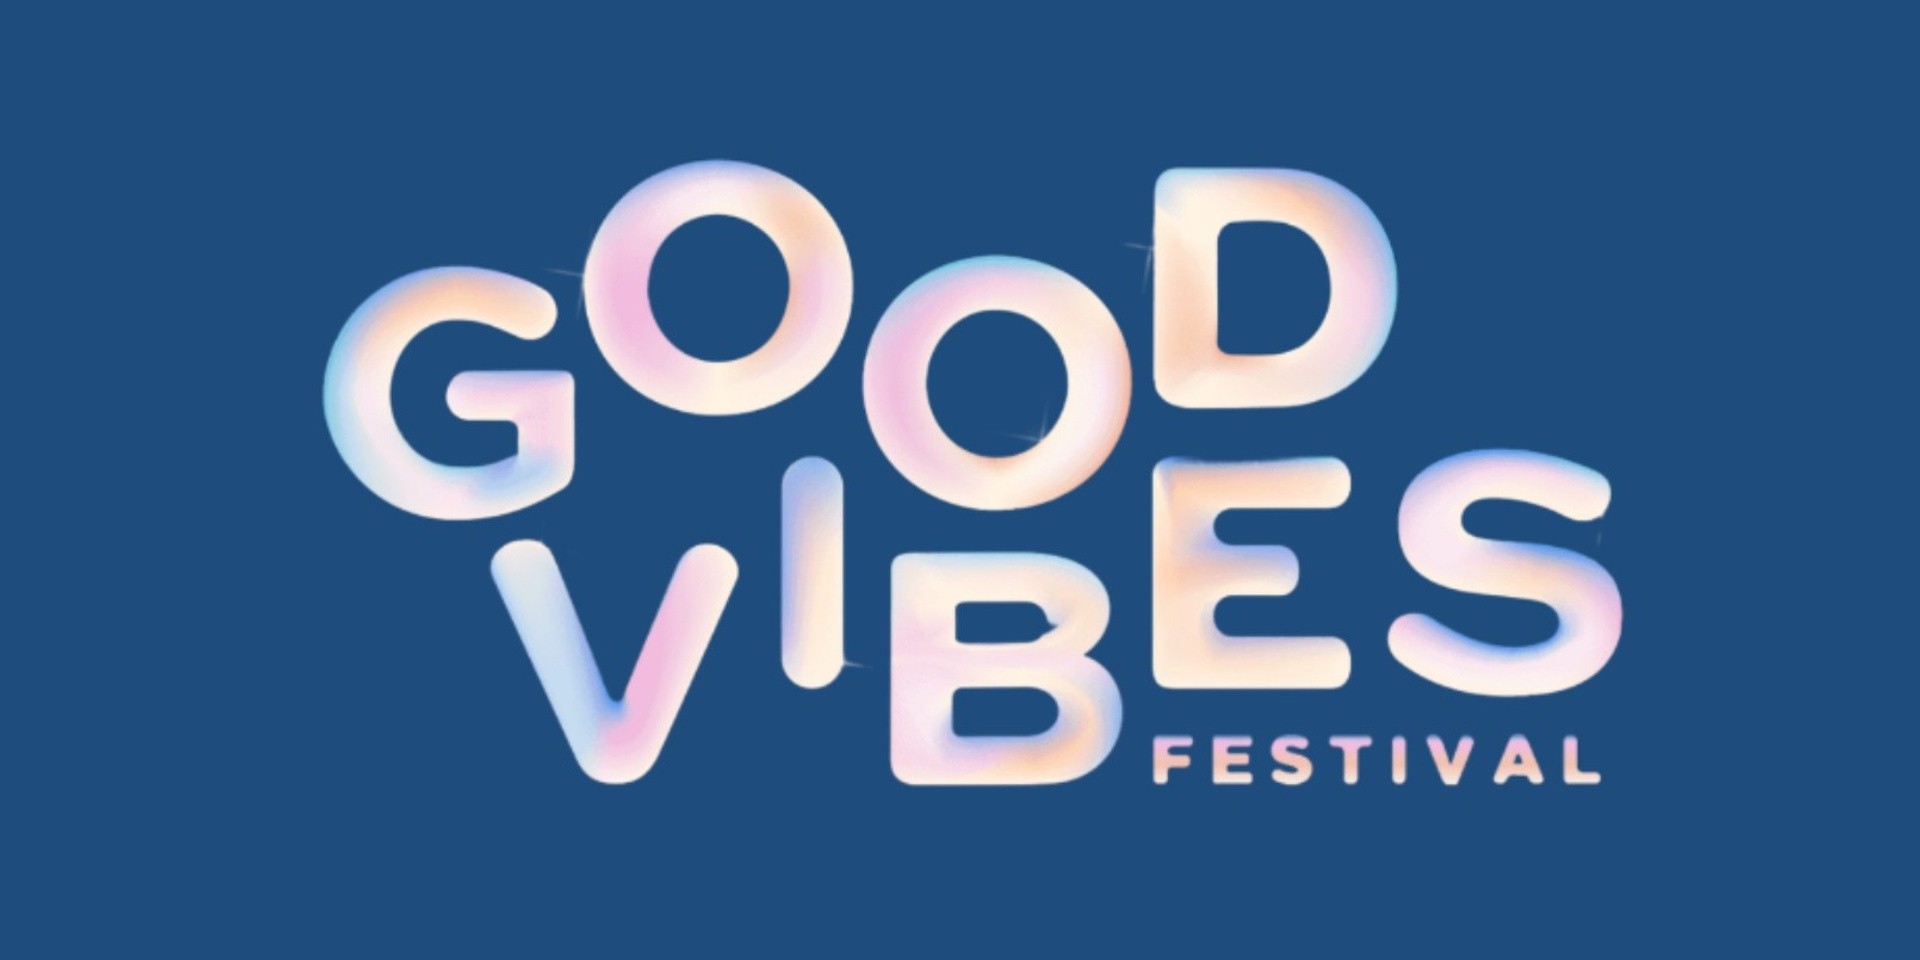 Good Vibes Festival 2023 has been cancelled following "the controversial conduct and remarks" by The 1975's Matty Healy